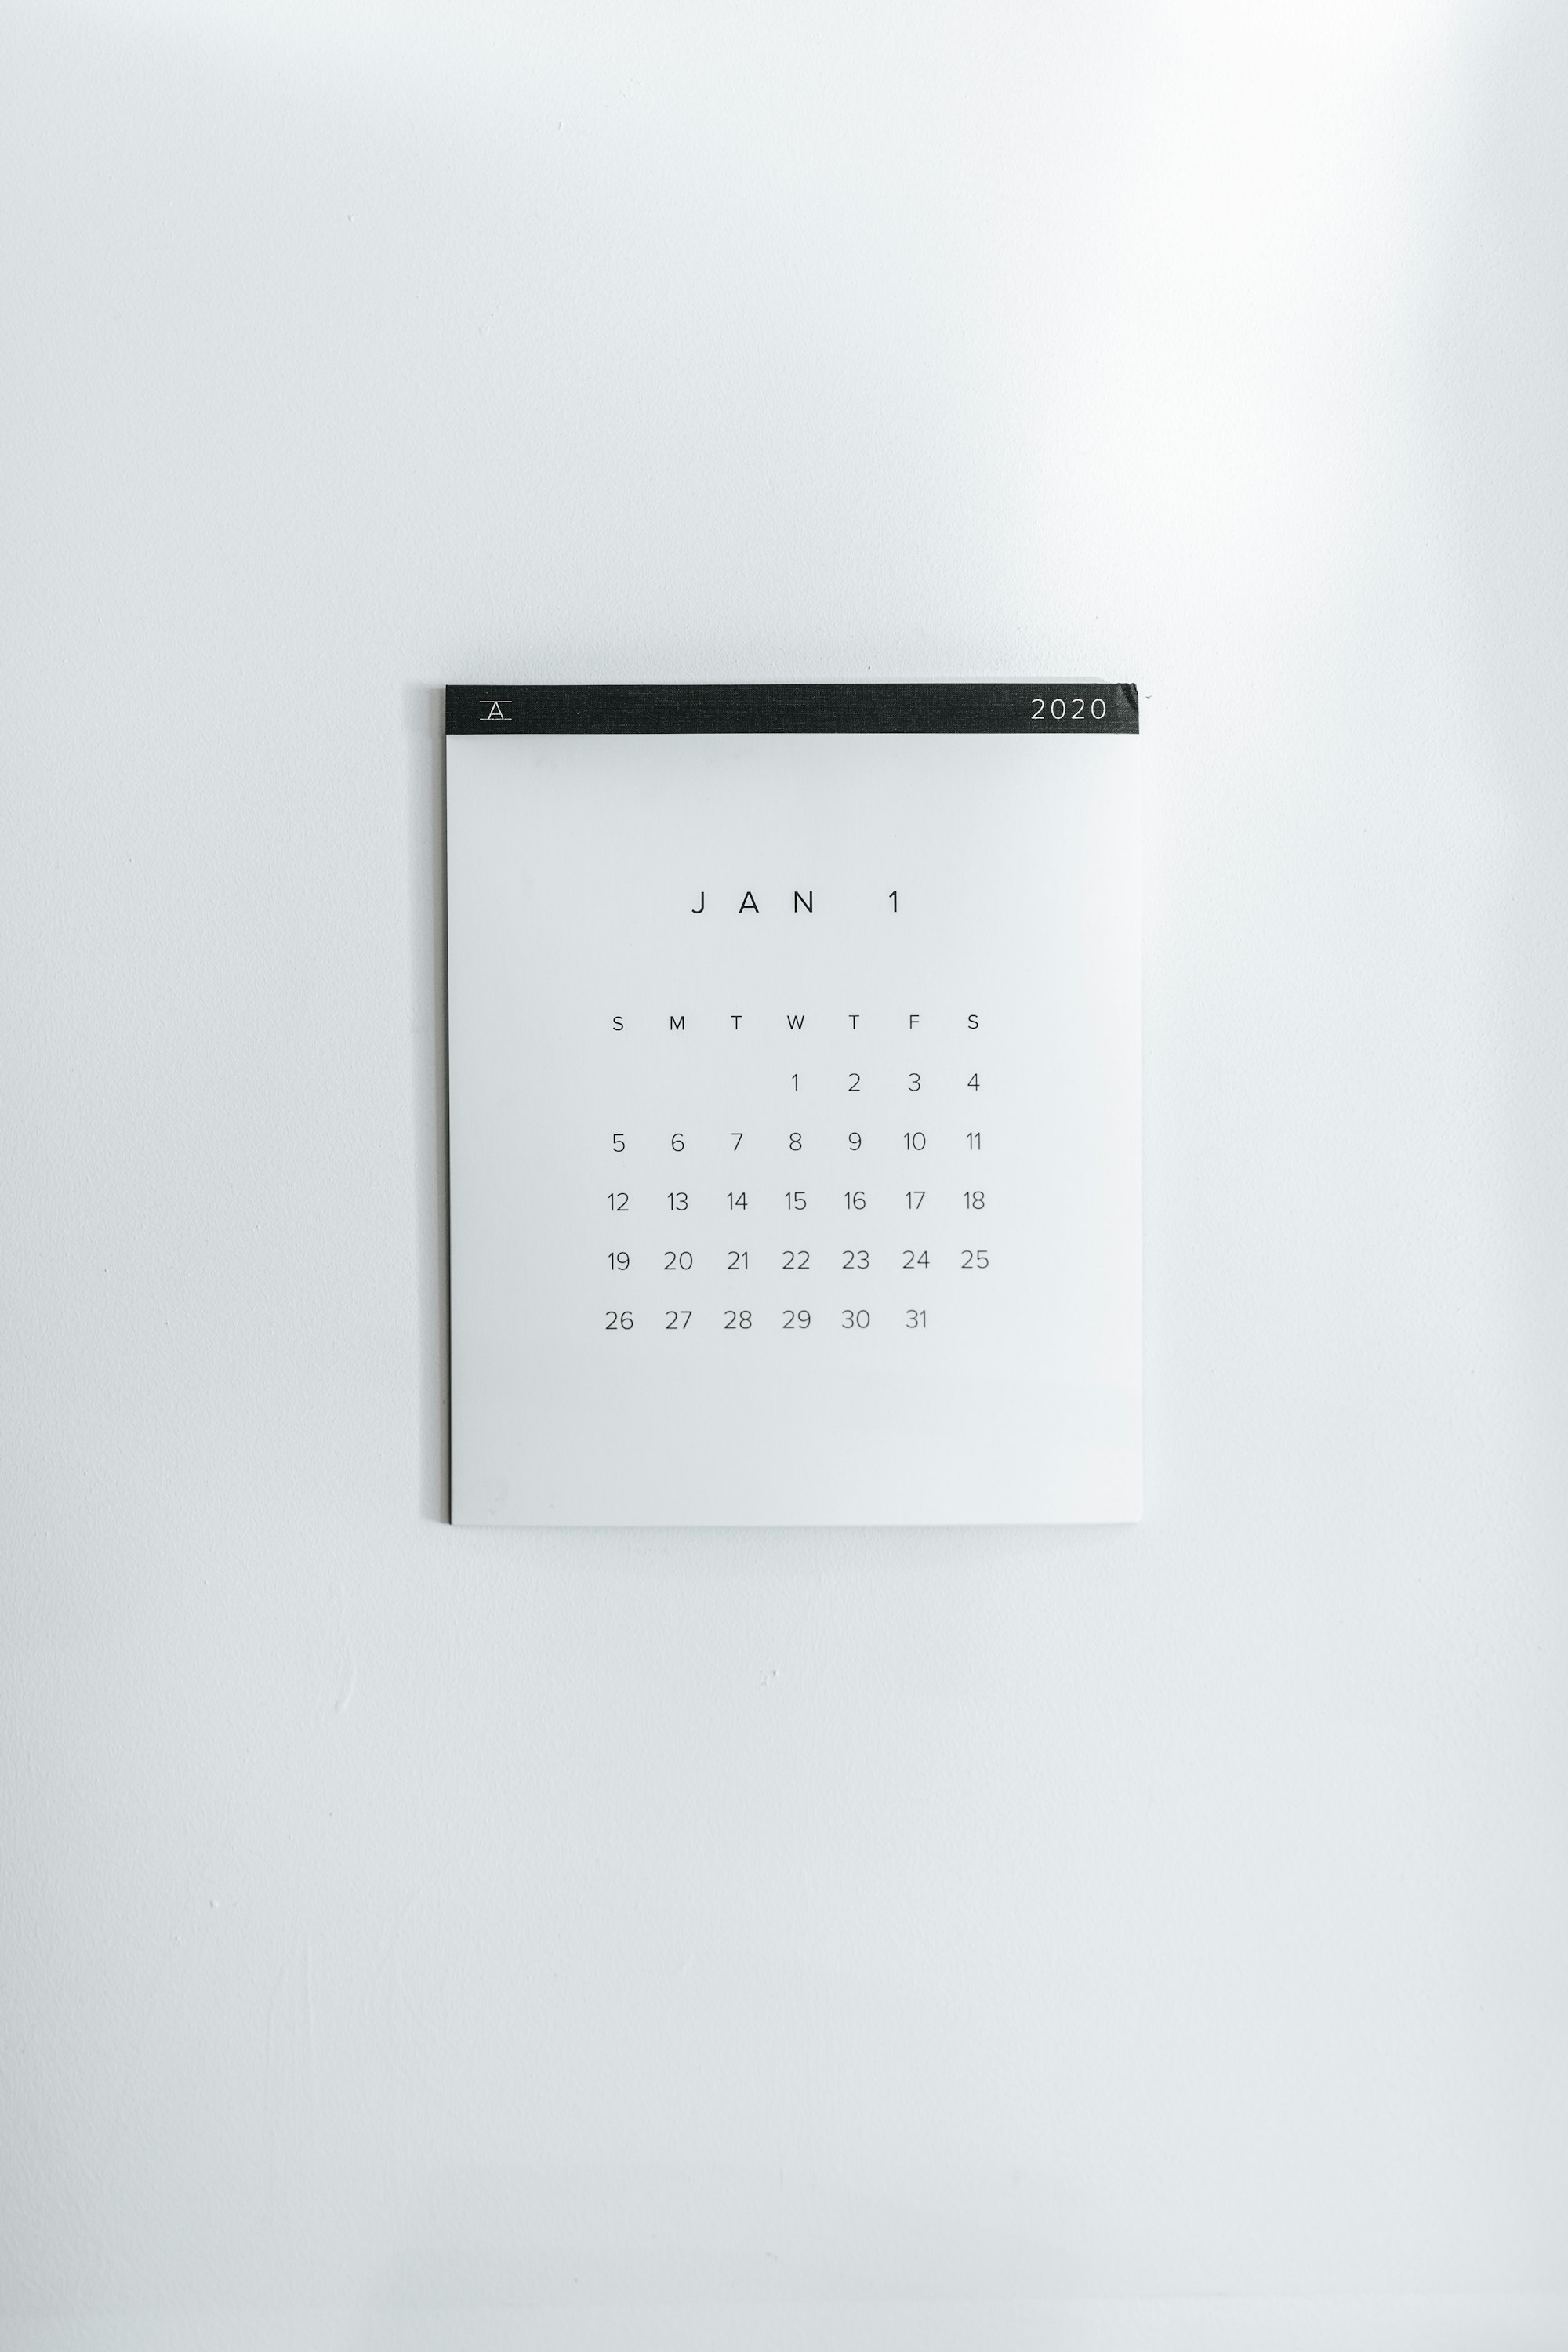 Picture of a calendar with January 2020 showing